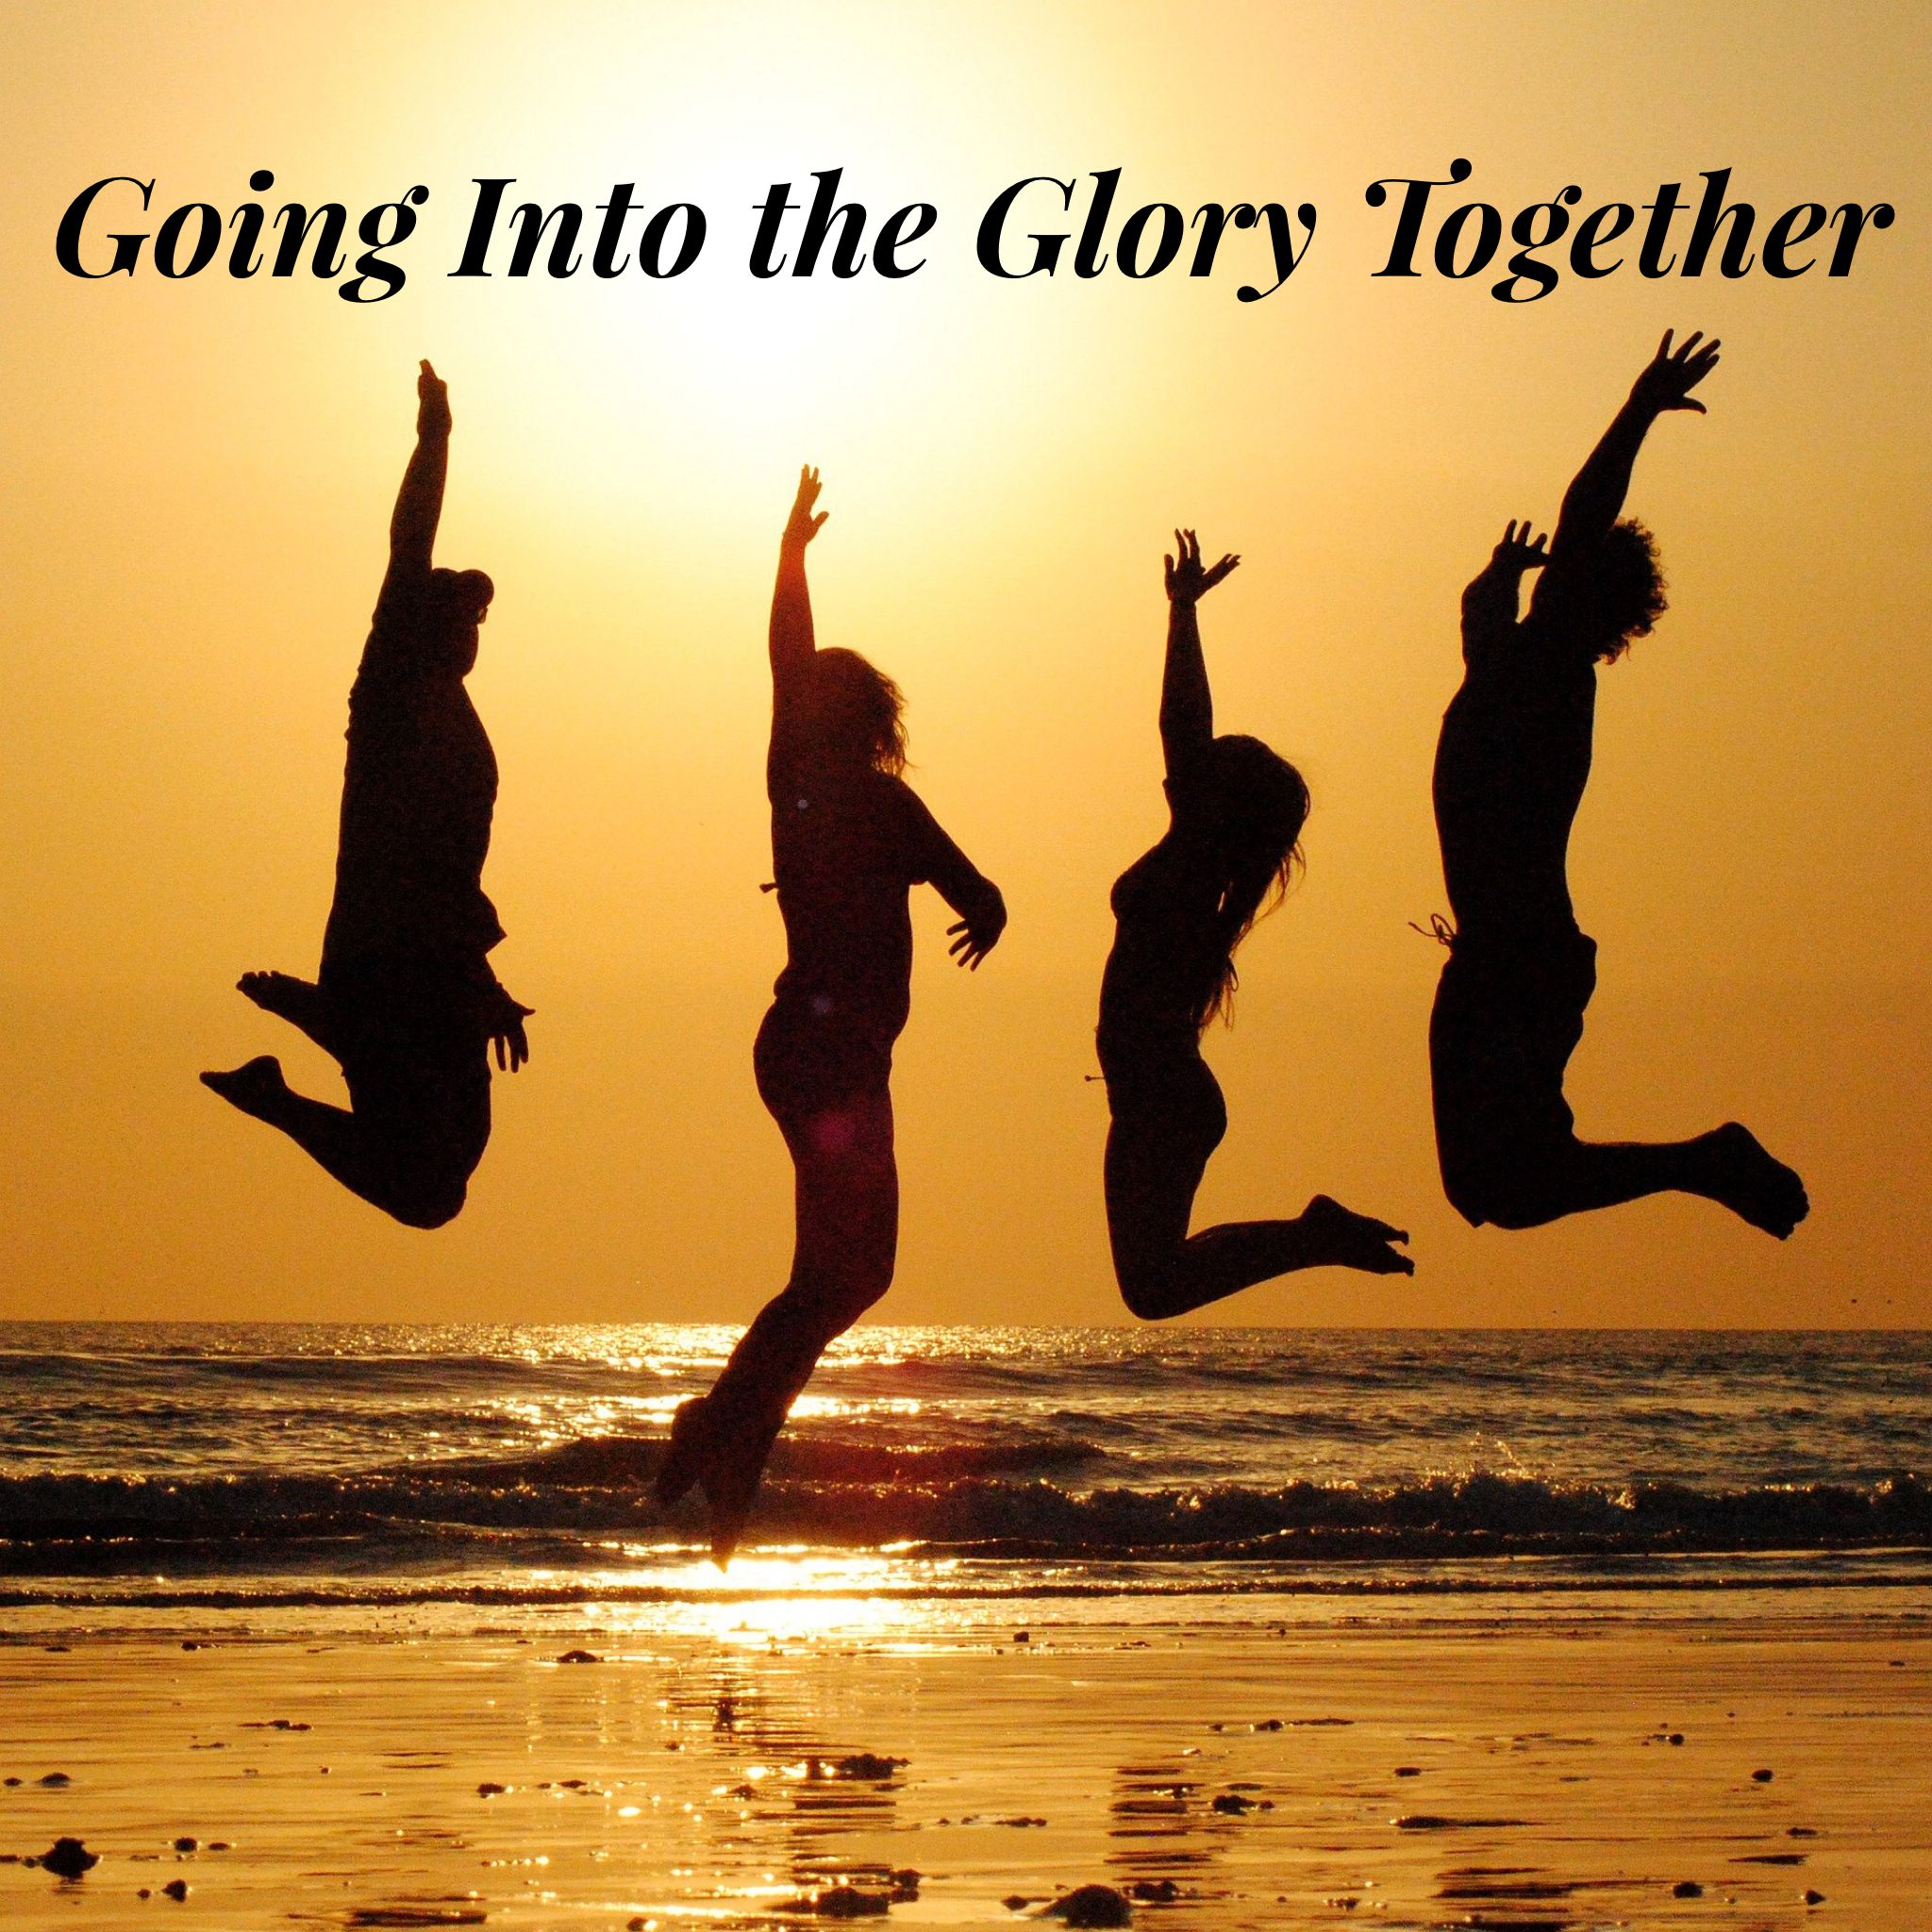 Going Into the Glory Together- 12/6/20